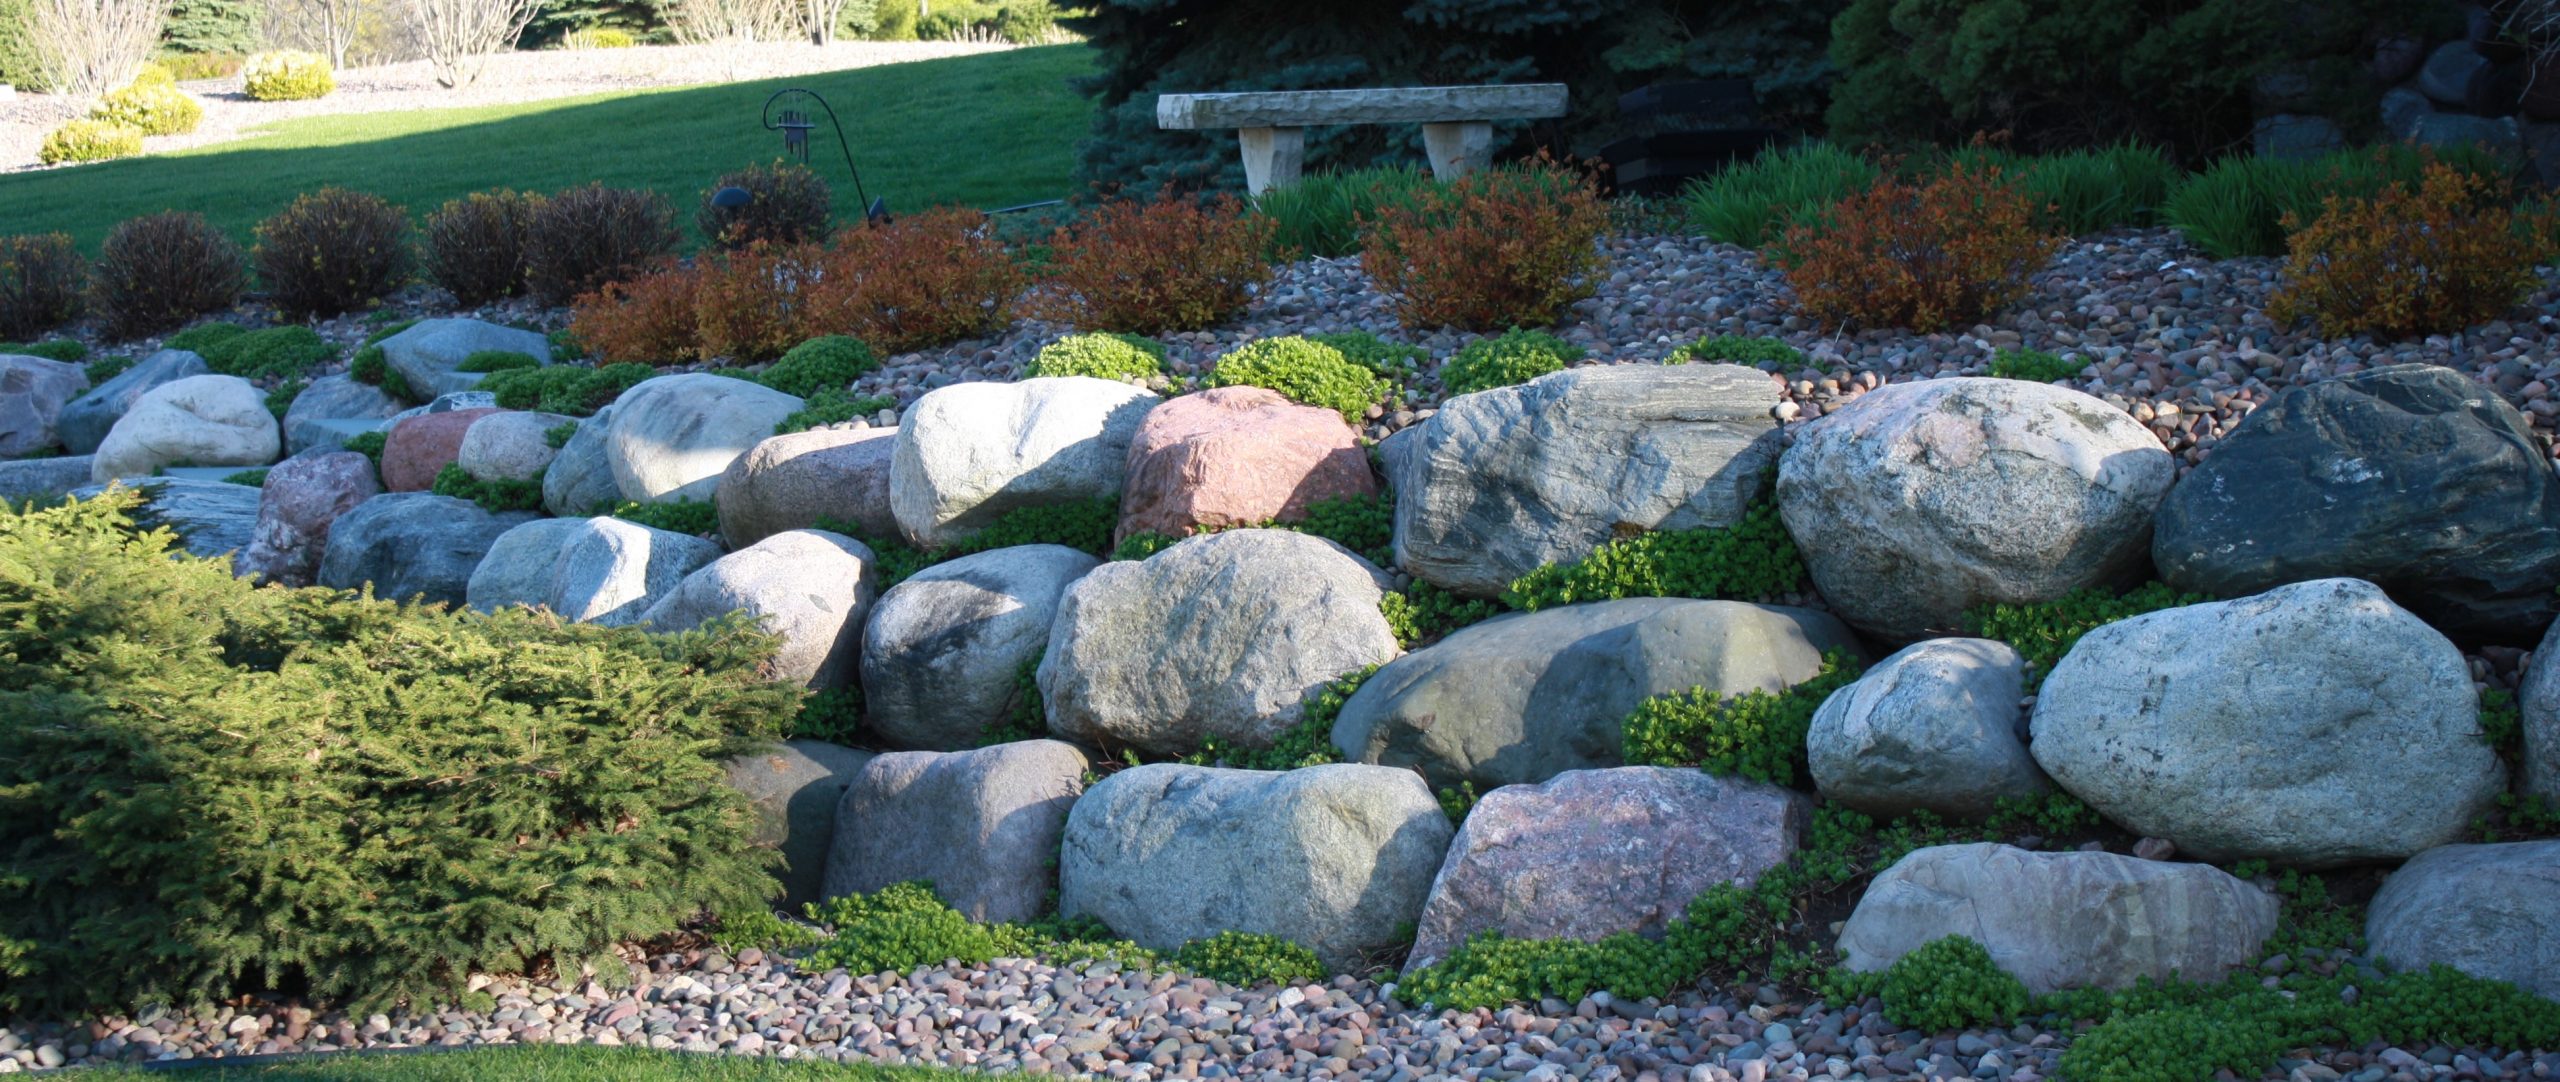 Wisconsin Granite Boulders Lemke, Where To Find Boulders For Landscaping